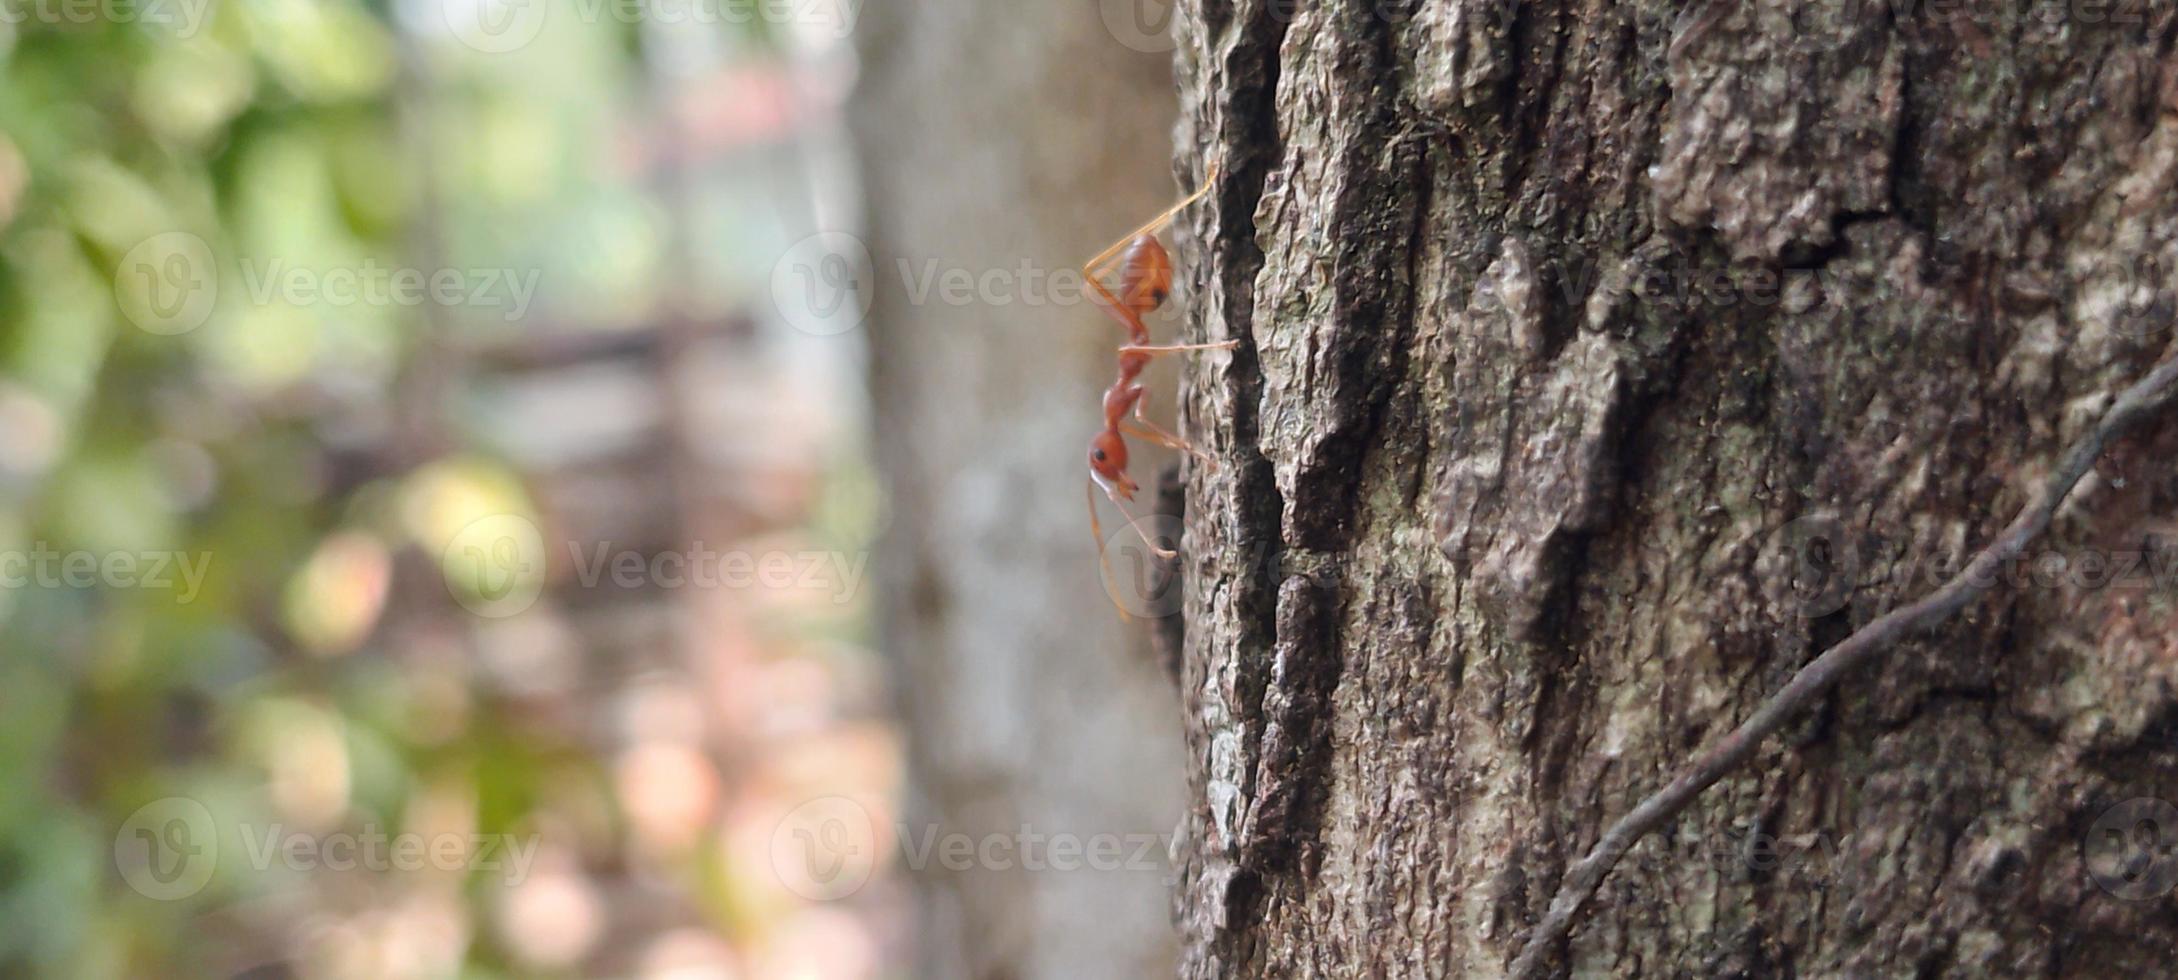 Kerengga is a large red ant that is known to have a high ability to form webbing for their nests is called weaver ant photo